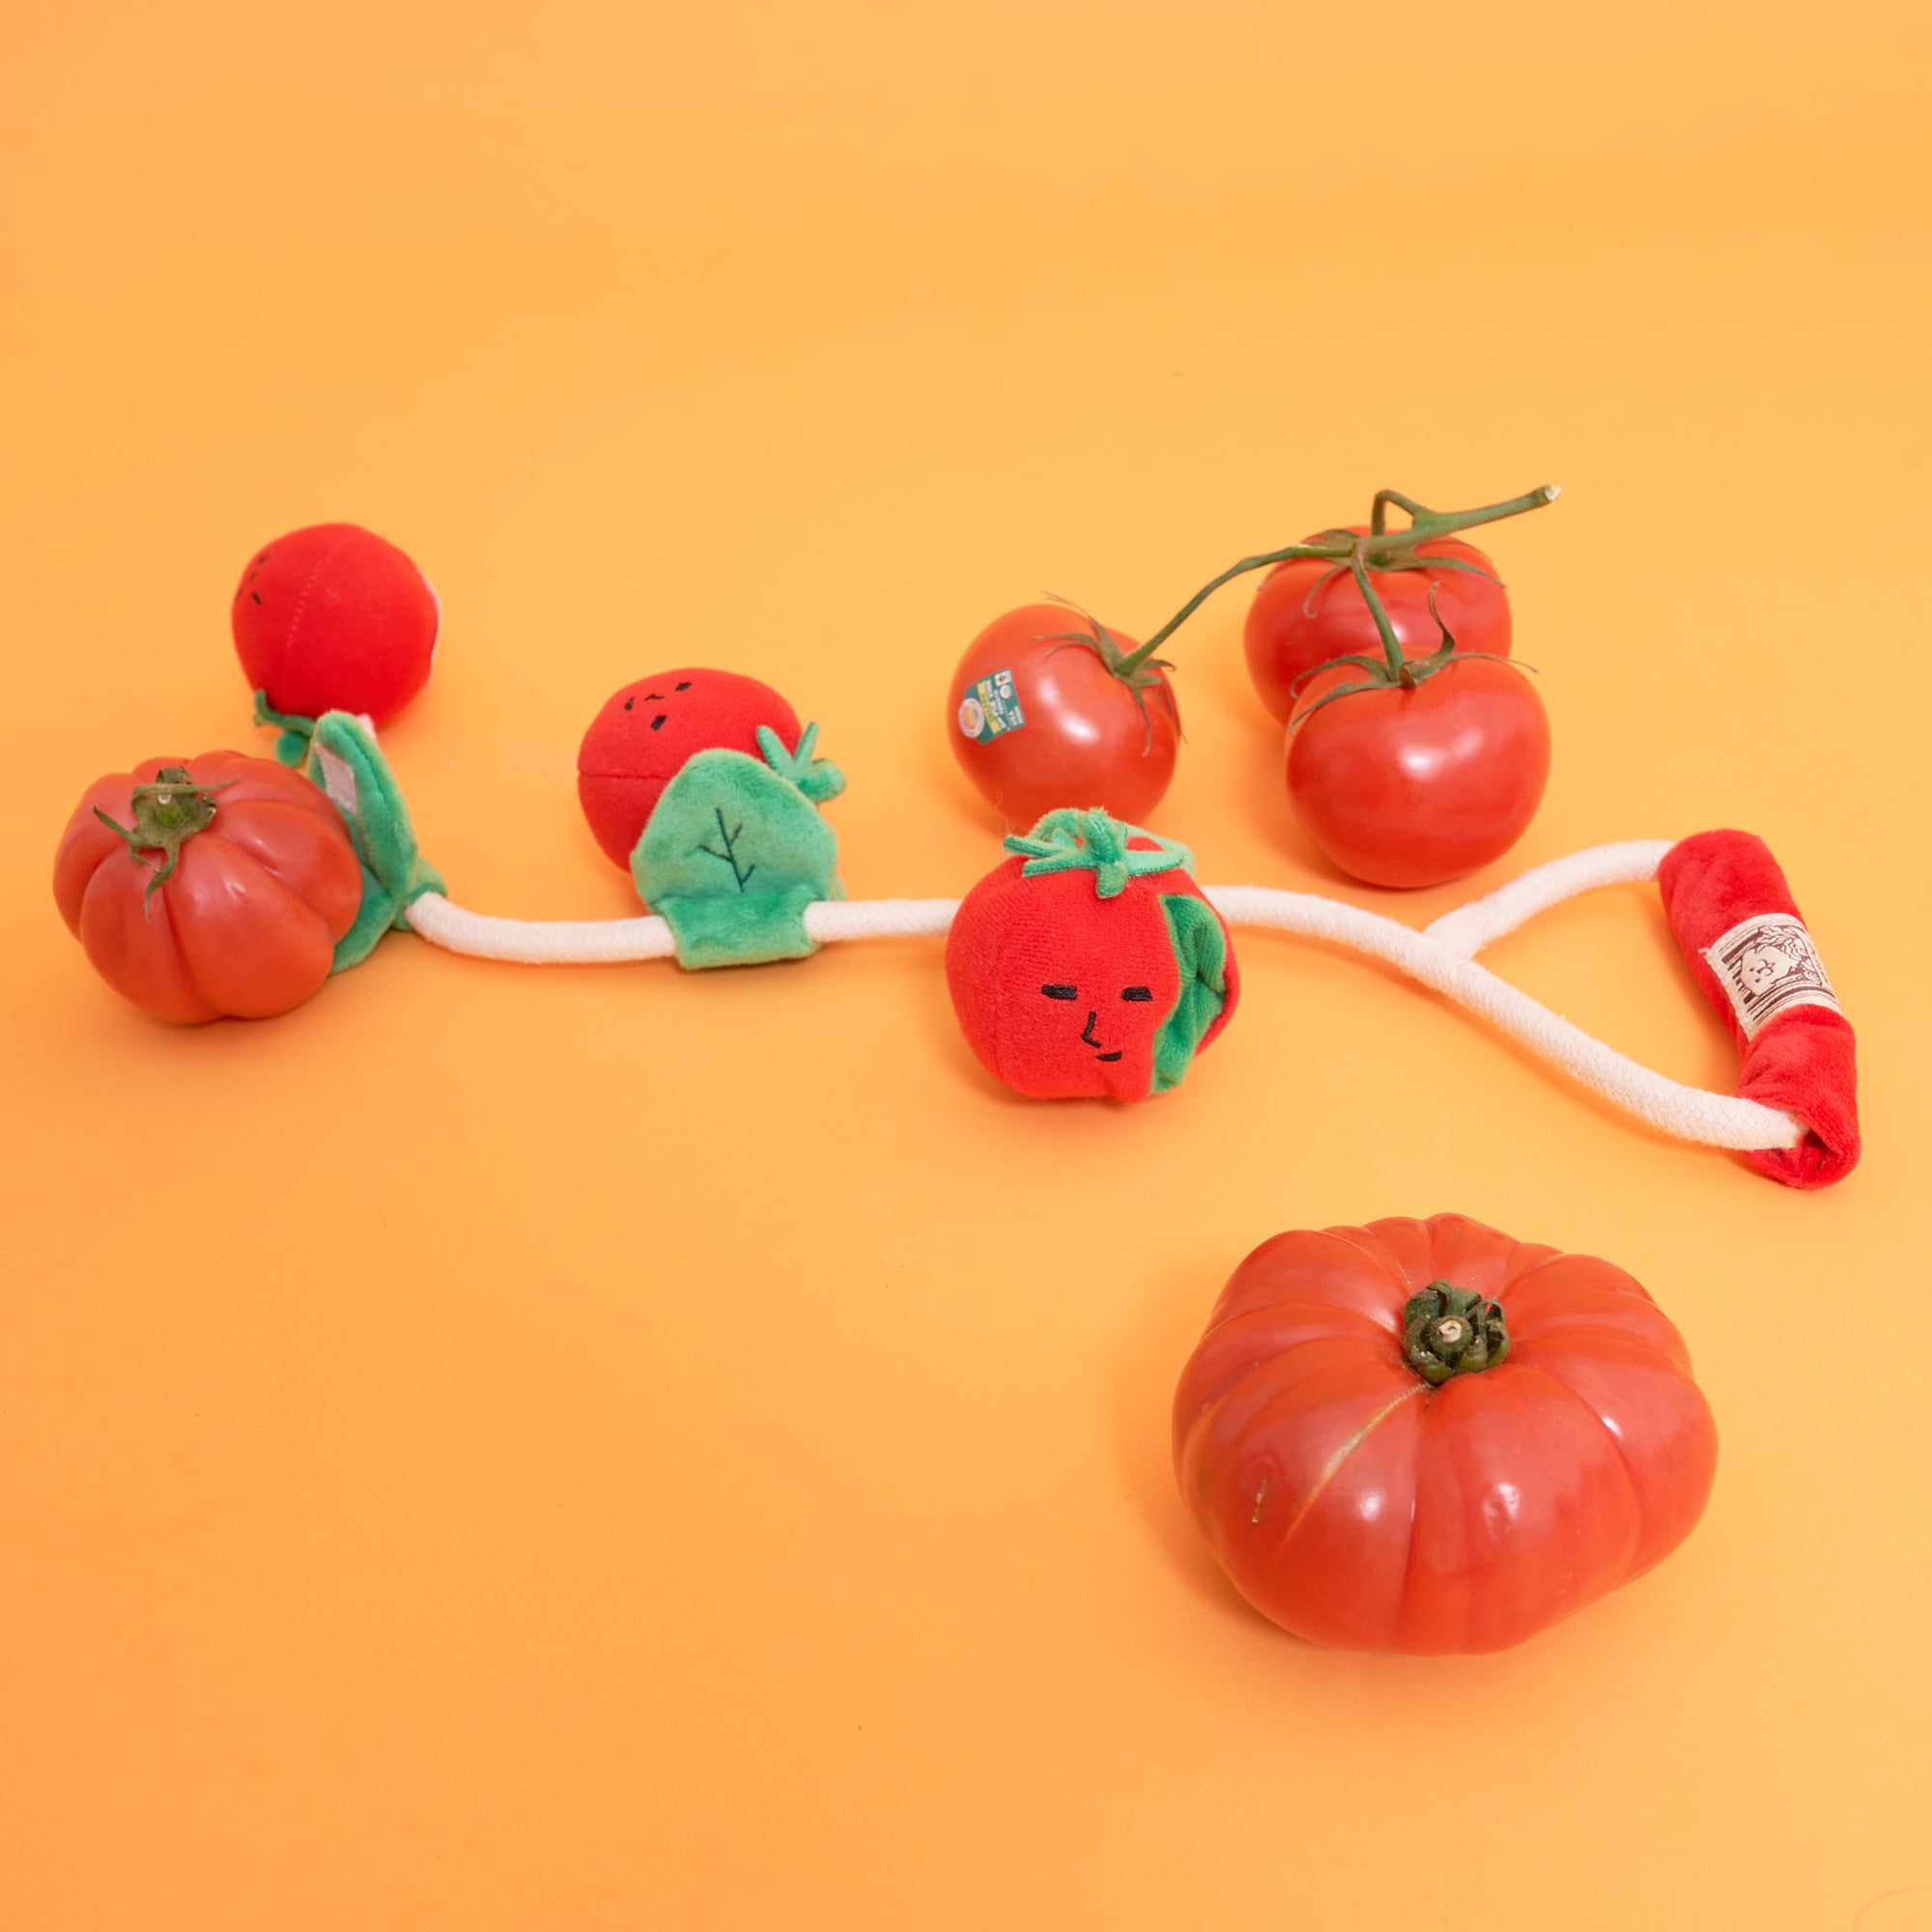 Displayed is an arrangement combining plush tomato toys with actual tomatoes, presented on an orange background. This setup may imply a connection between the toys and healthy food, or serve as a playful display.